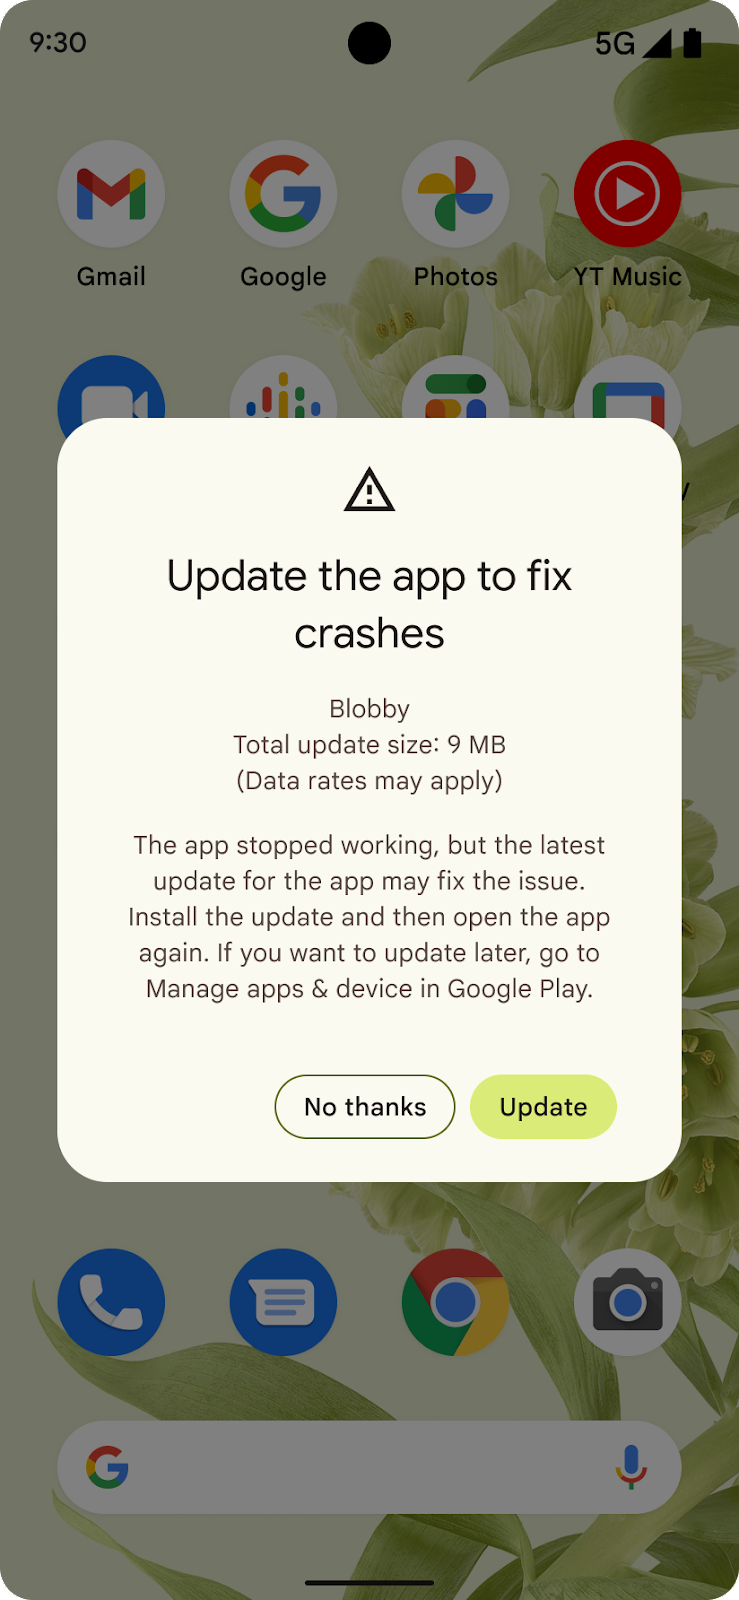 Update the app to fix crashes dialog